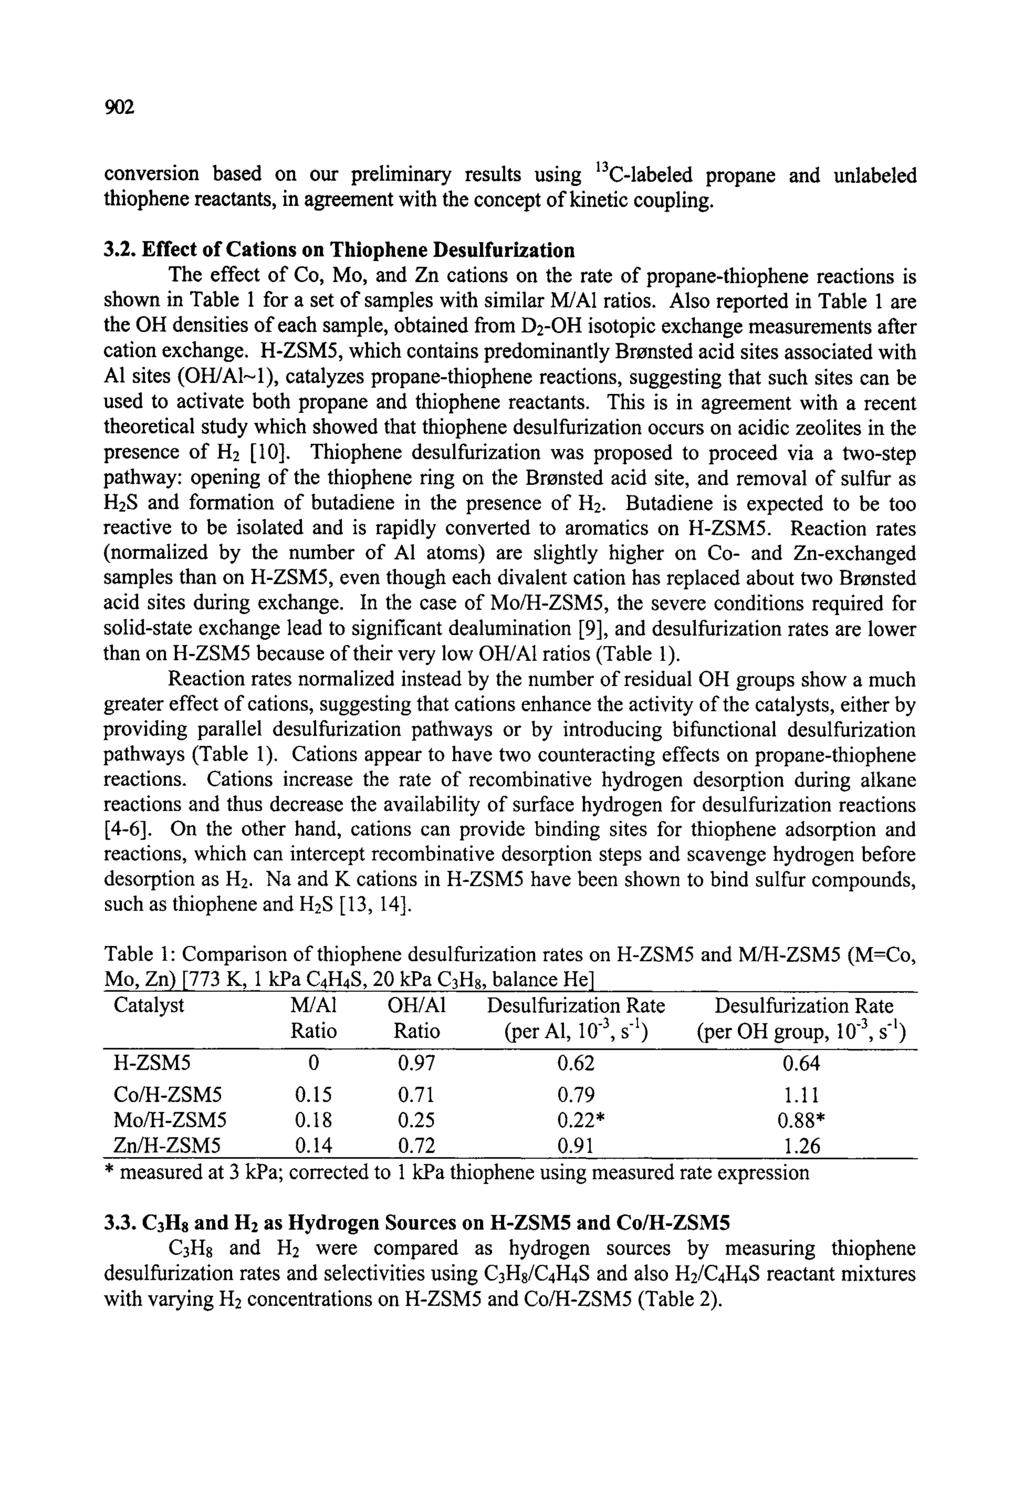 902 conversion based on our preliminary results using 13C-labeled propane and unlabeled thiophene reactants, in agreement with the concept of kinetic coupling. 3.2. Effect of Cations on Thiophene Desulfurization The effect of Co, Mo, and Zn cations on the rate of propane-thiophene reactions is shown in Table 1 for a set of samples with similar M/A1 ratios.